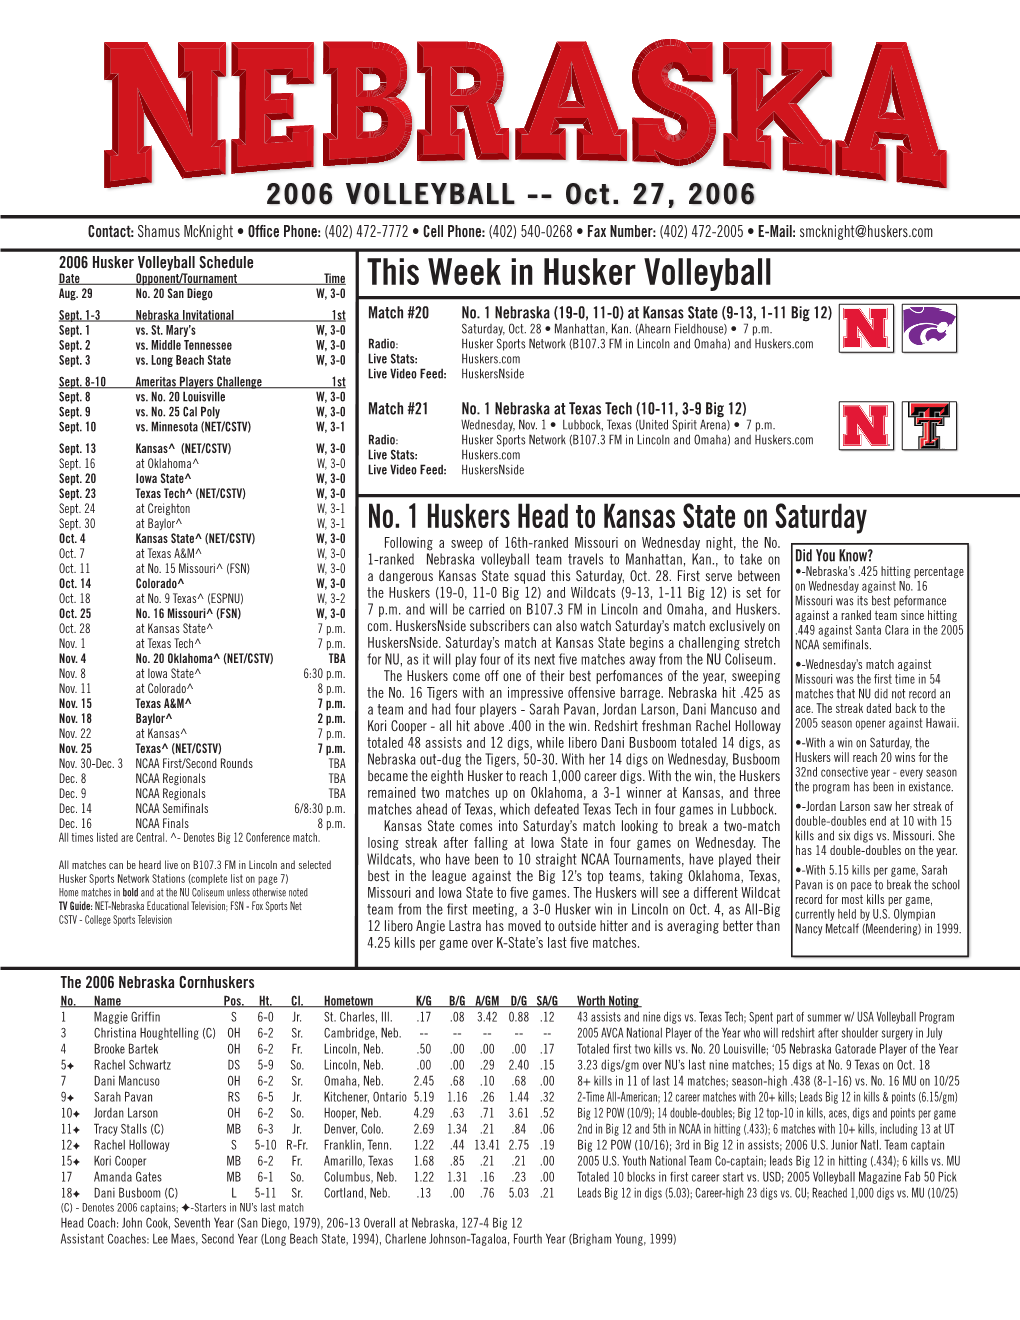 This Week in Husker Volleyball Aug